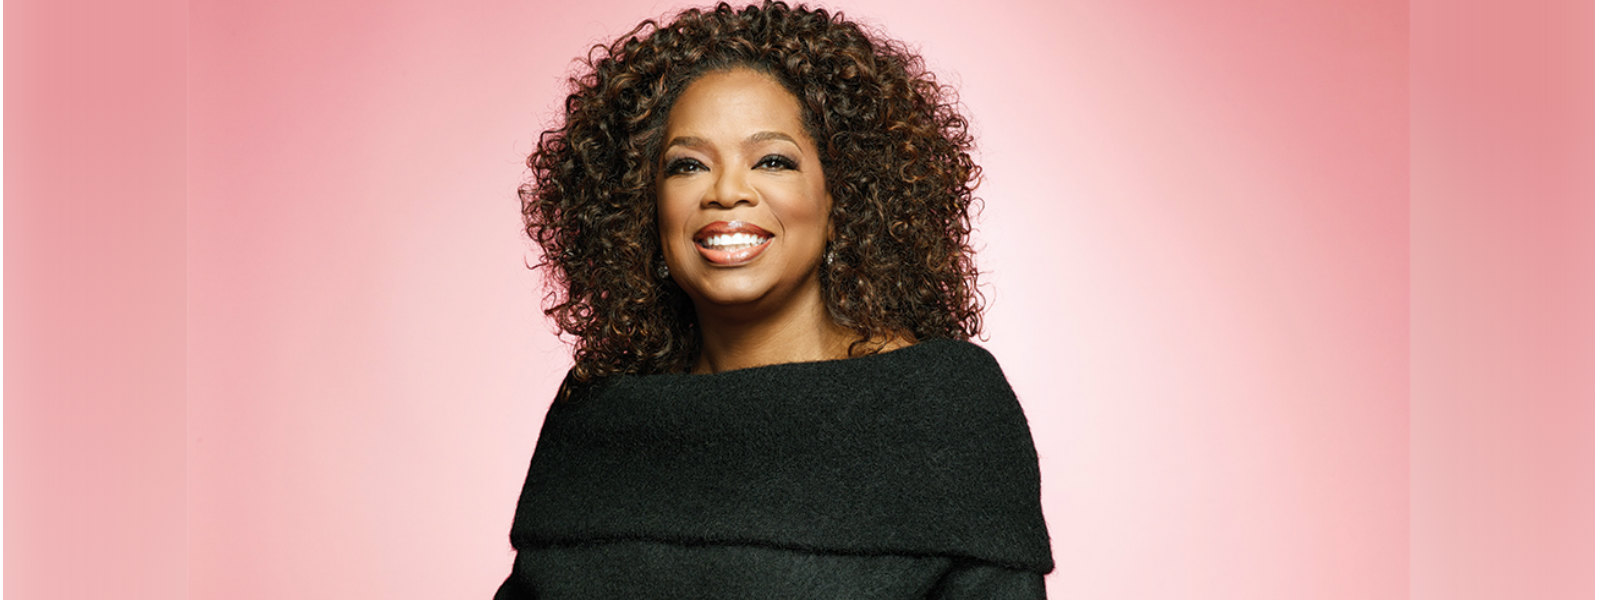 Winfrey signs multi-year partnership with Apple